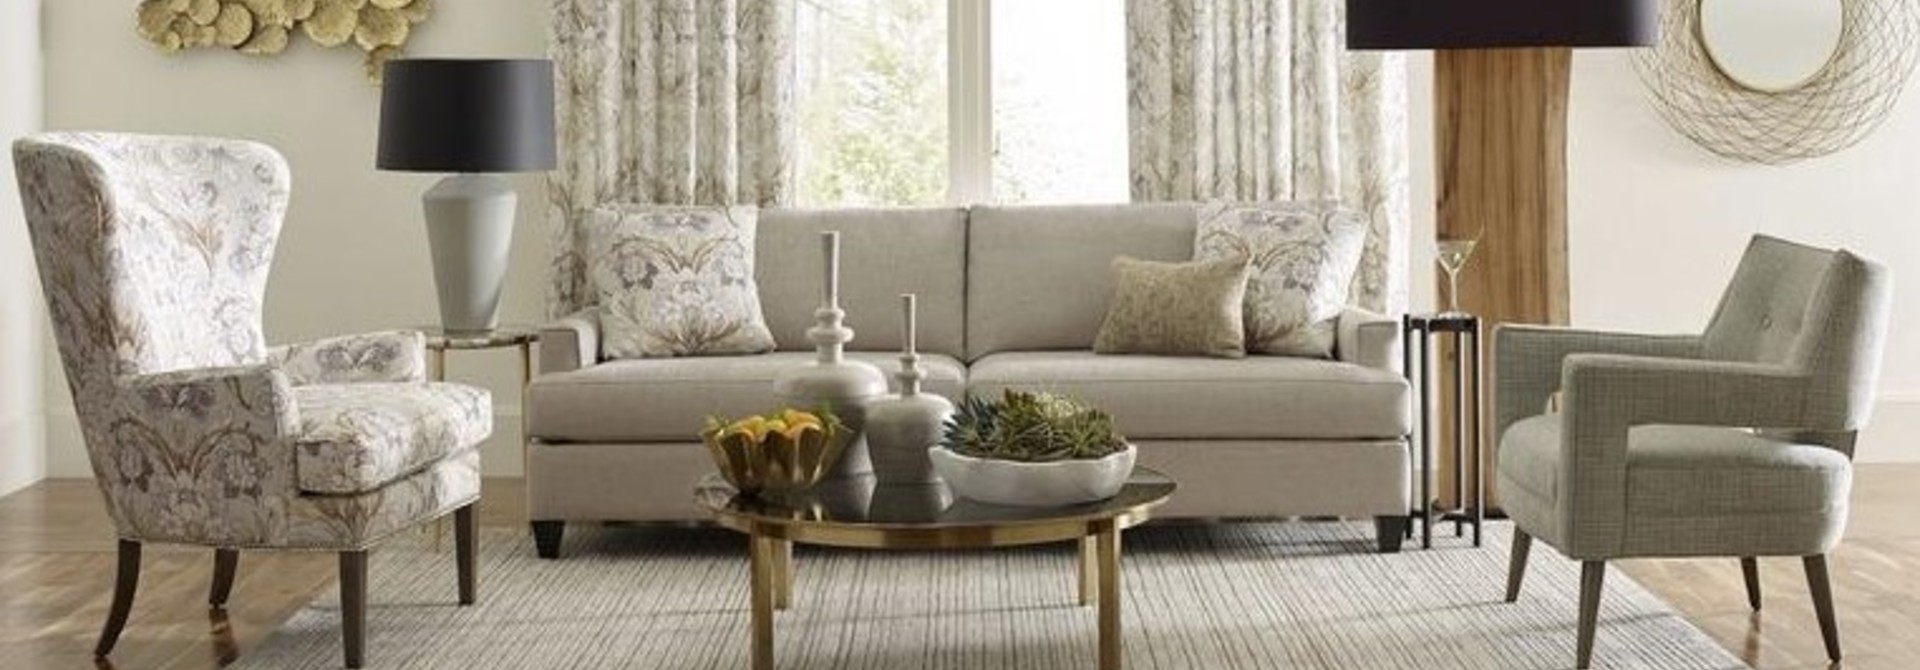 SOFA | The Foyer & Great Room Collection